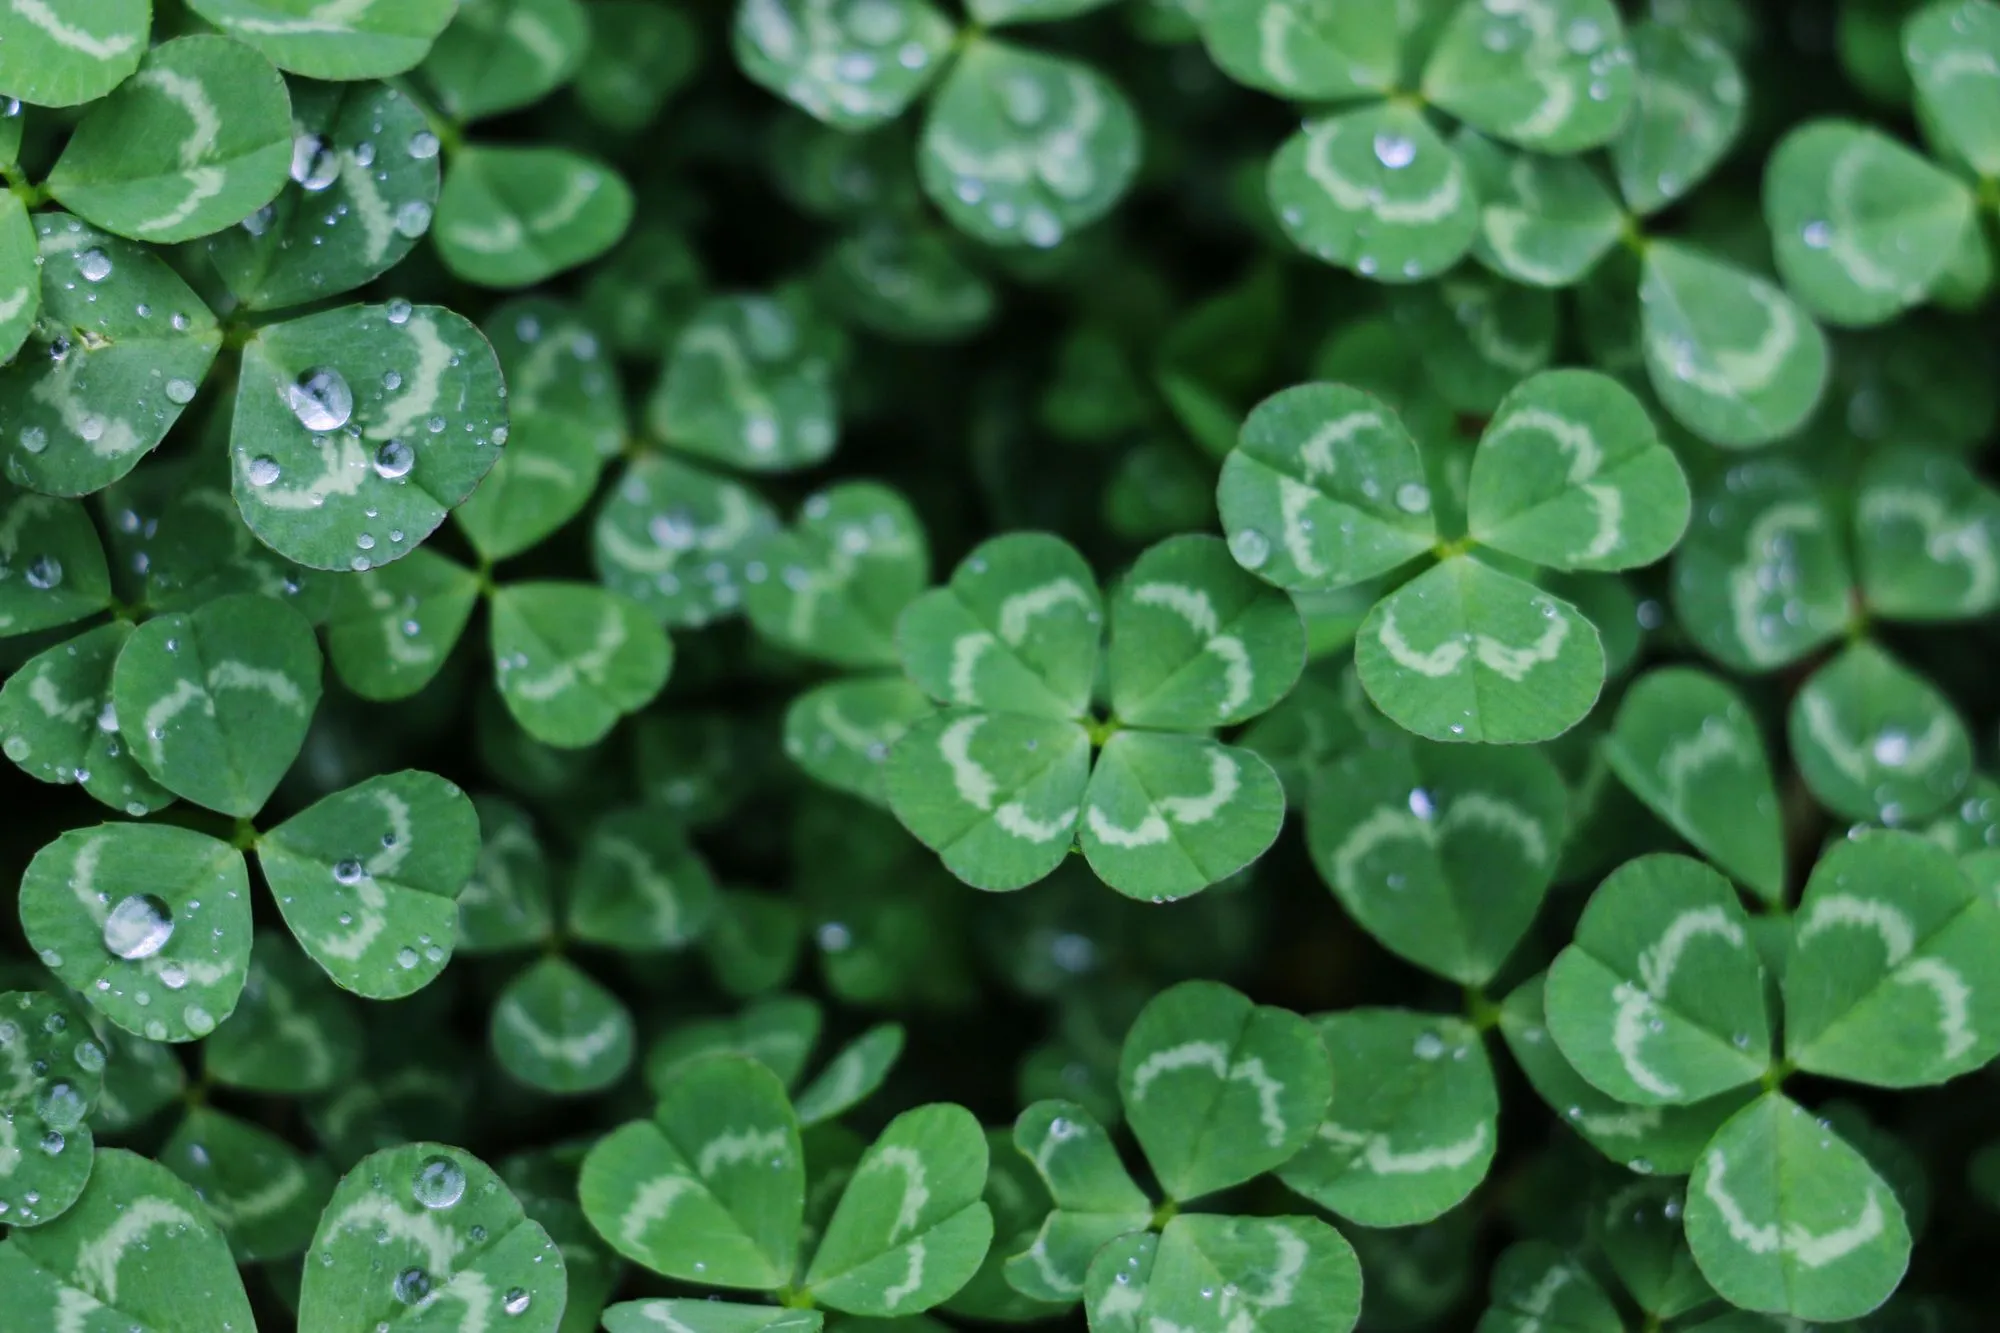 How Rare Are 4 Leaf Clovers? Odds Of Finding Four Leaf Clover